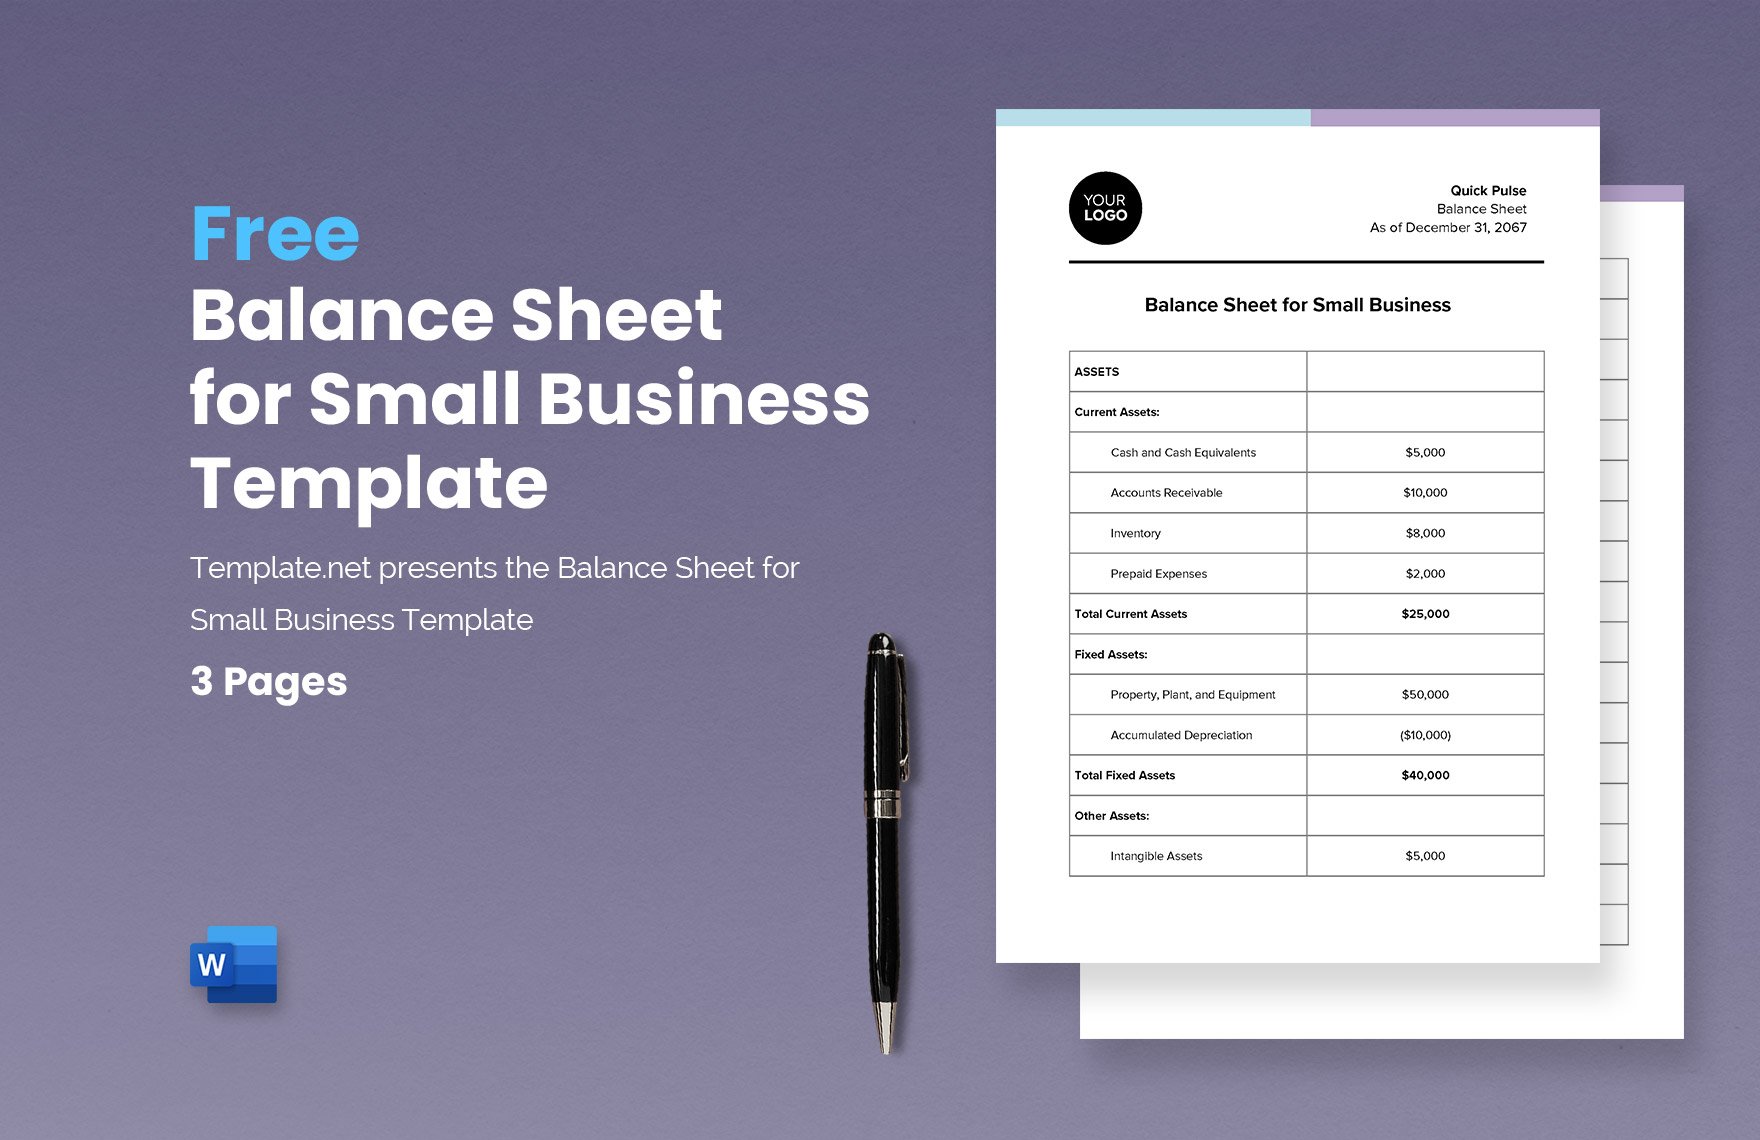 Free Balance Sheet for Small Business Template